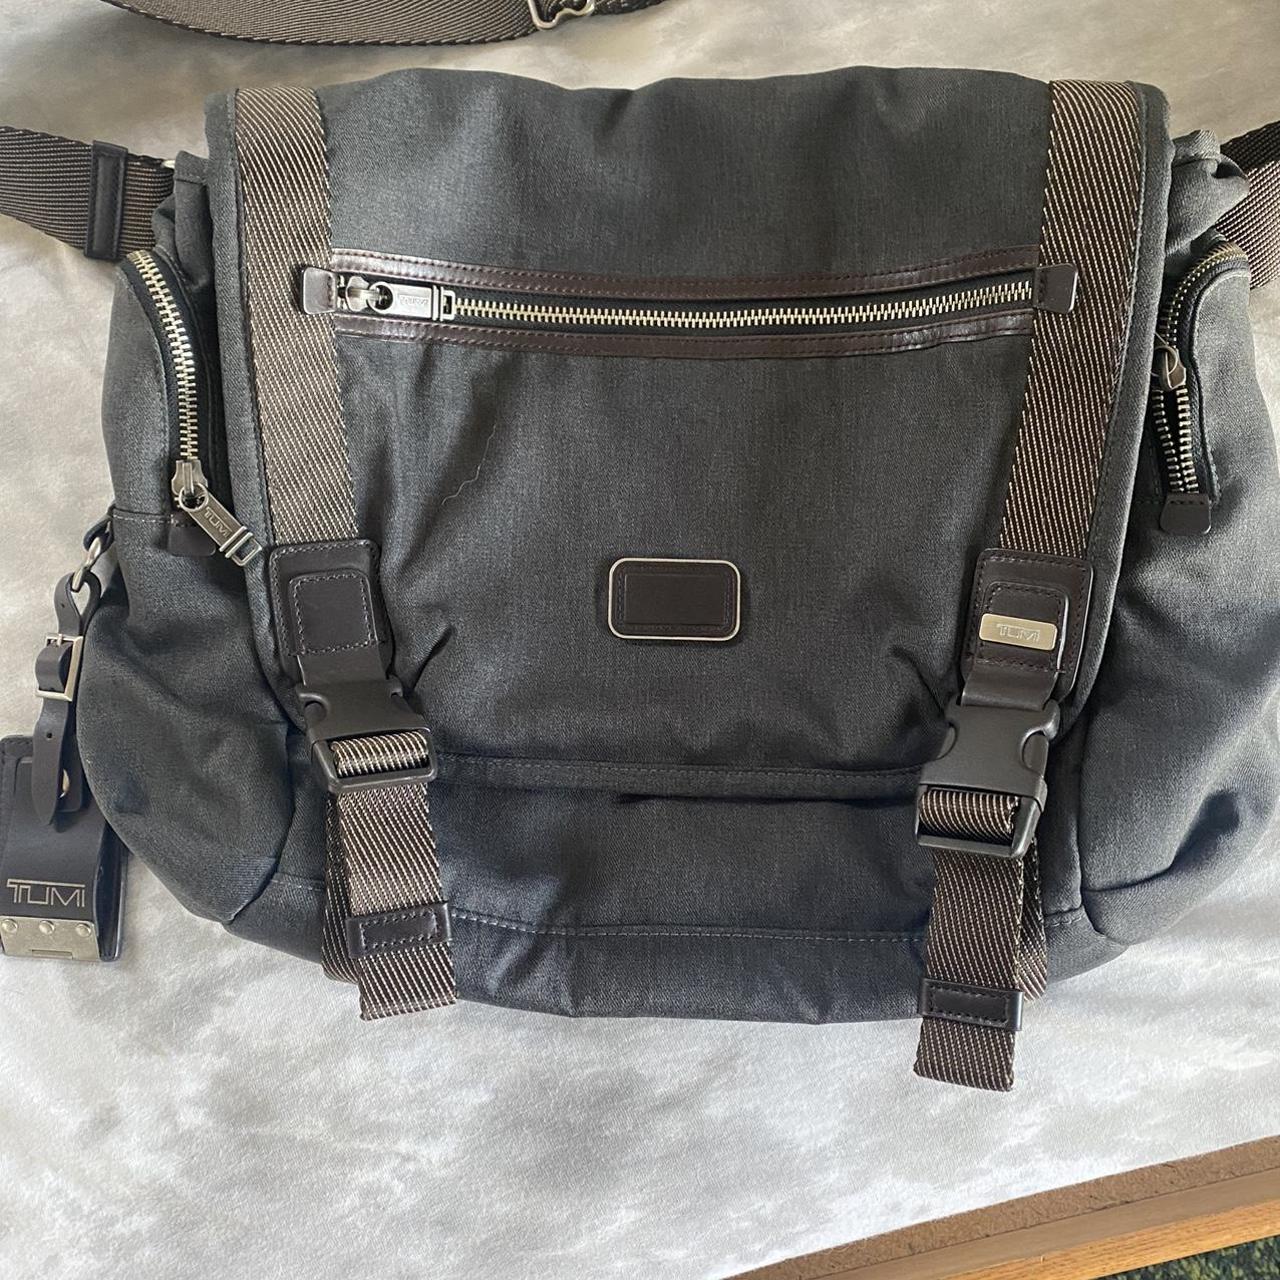 Product Image 1 - Tumi Messenger Bag

Like new condition

Lots